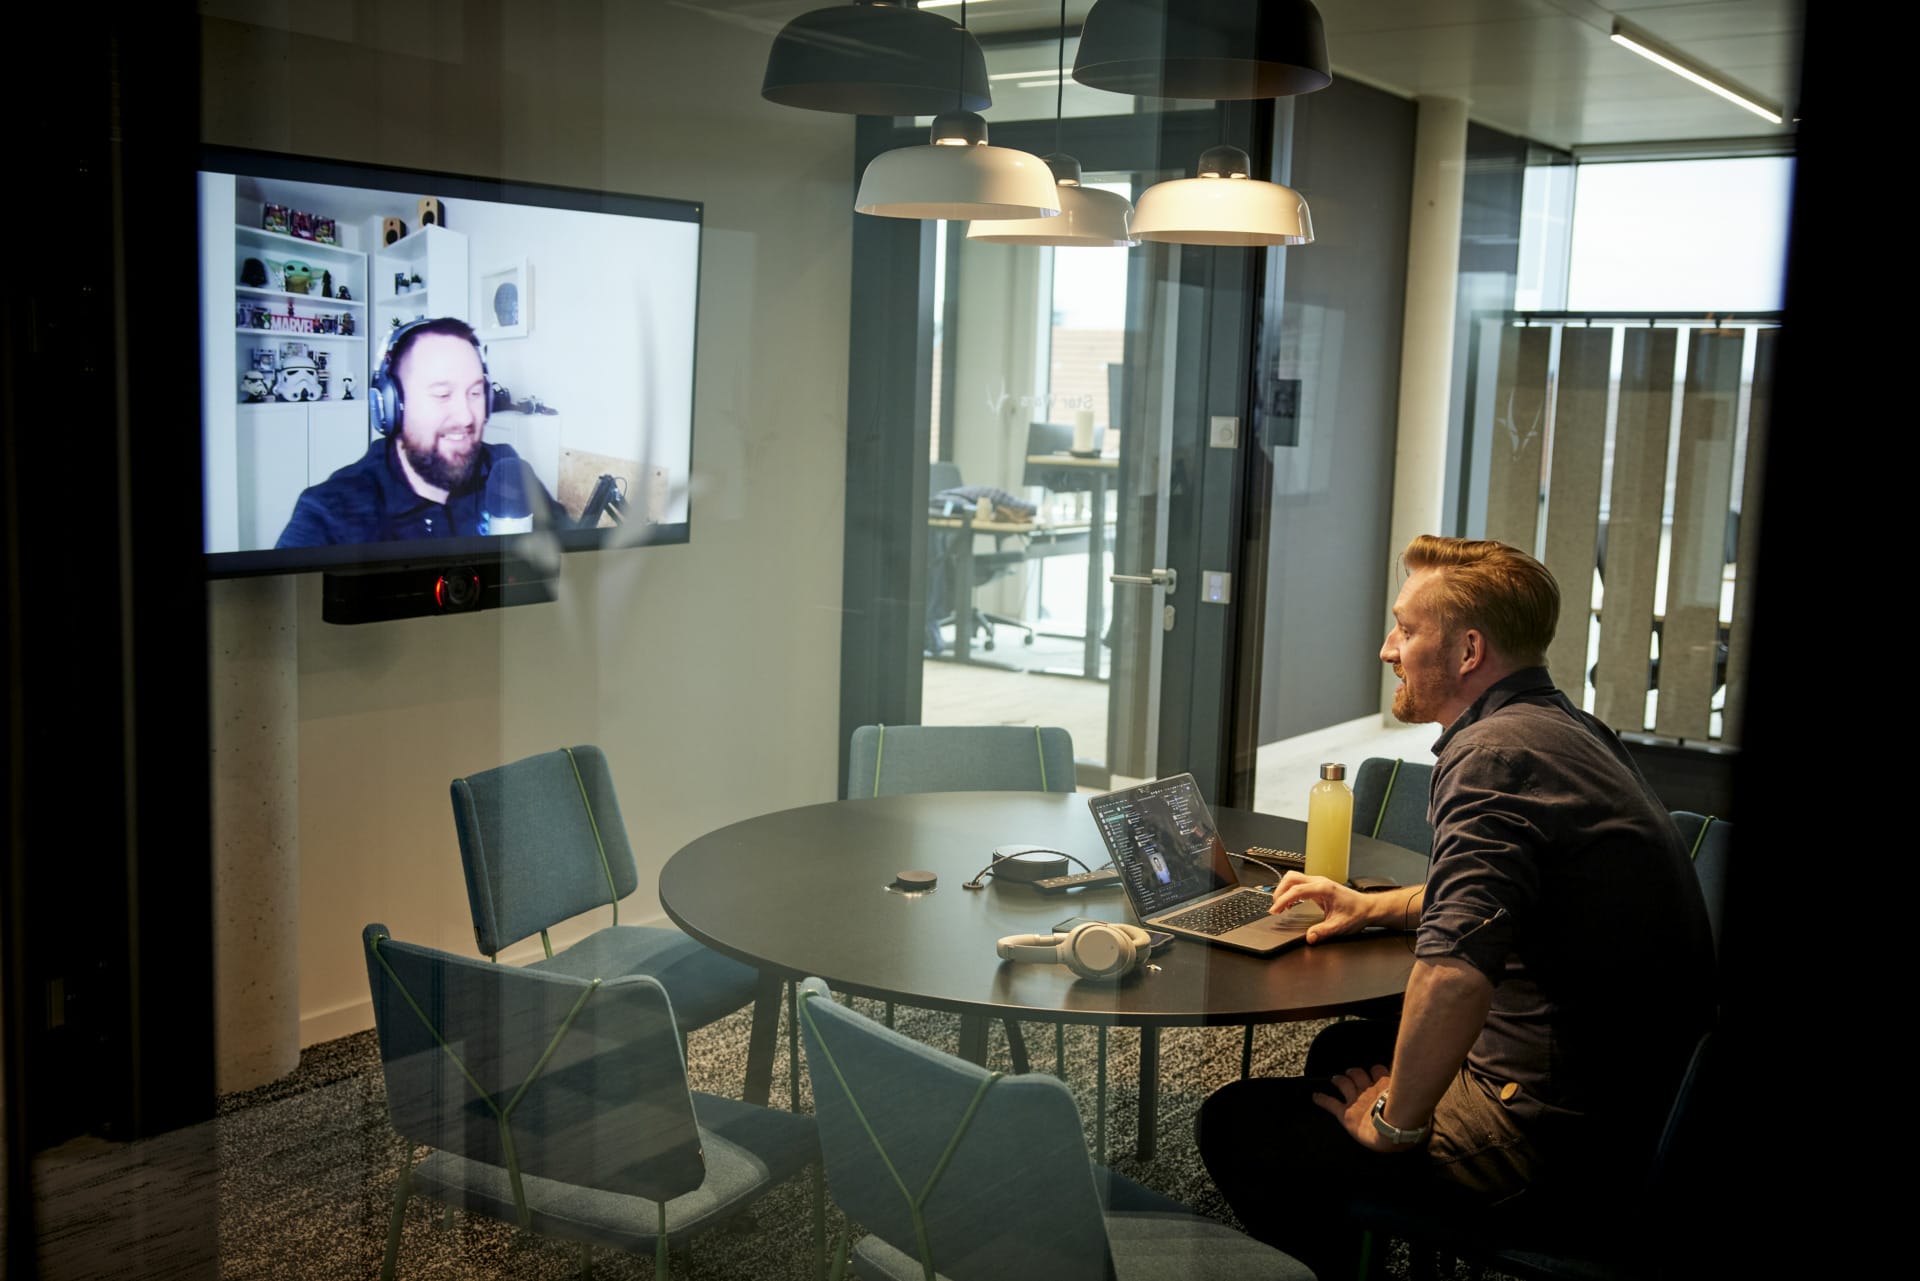 A man sits in a conference room using a laptop and headphones for a video call with the Spryker CMO, who is visible on a wall-mounted screen.